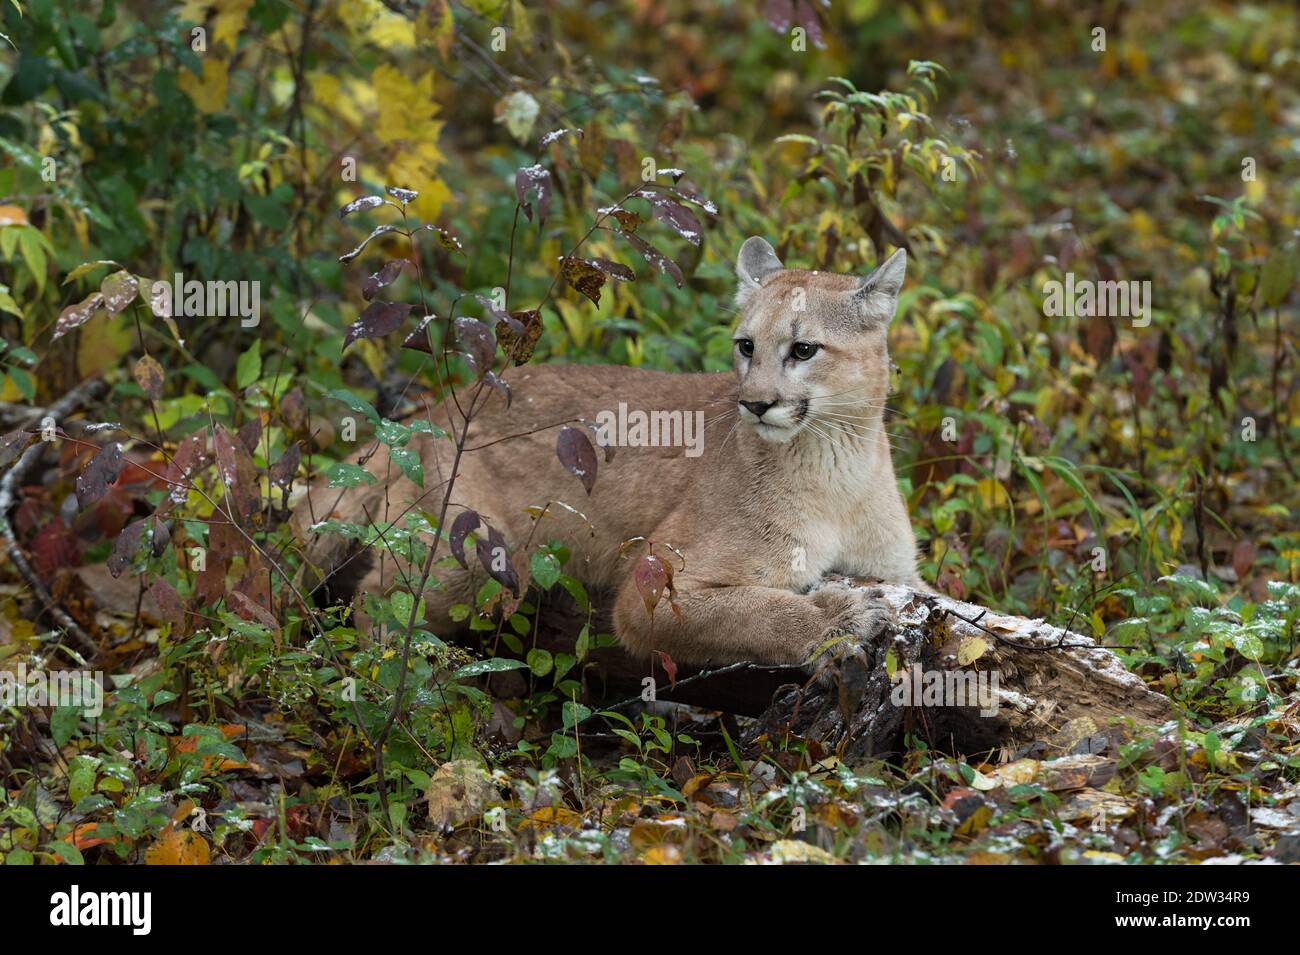 Cougar (Puma concolor) LIes on Log Sharpening Claws Ears Back Autumn -  captive animal Stock Photo - Alamy